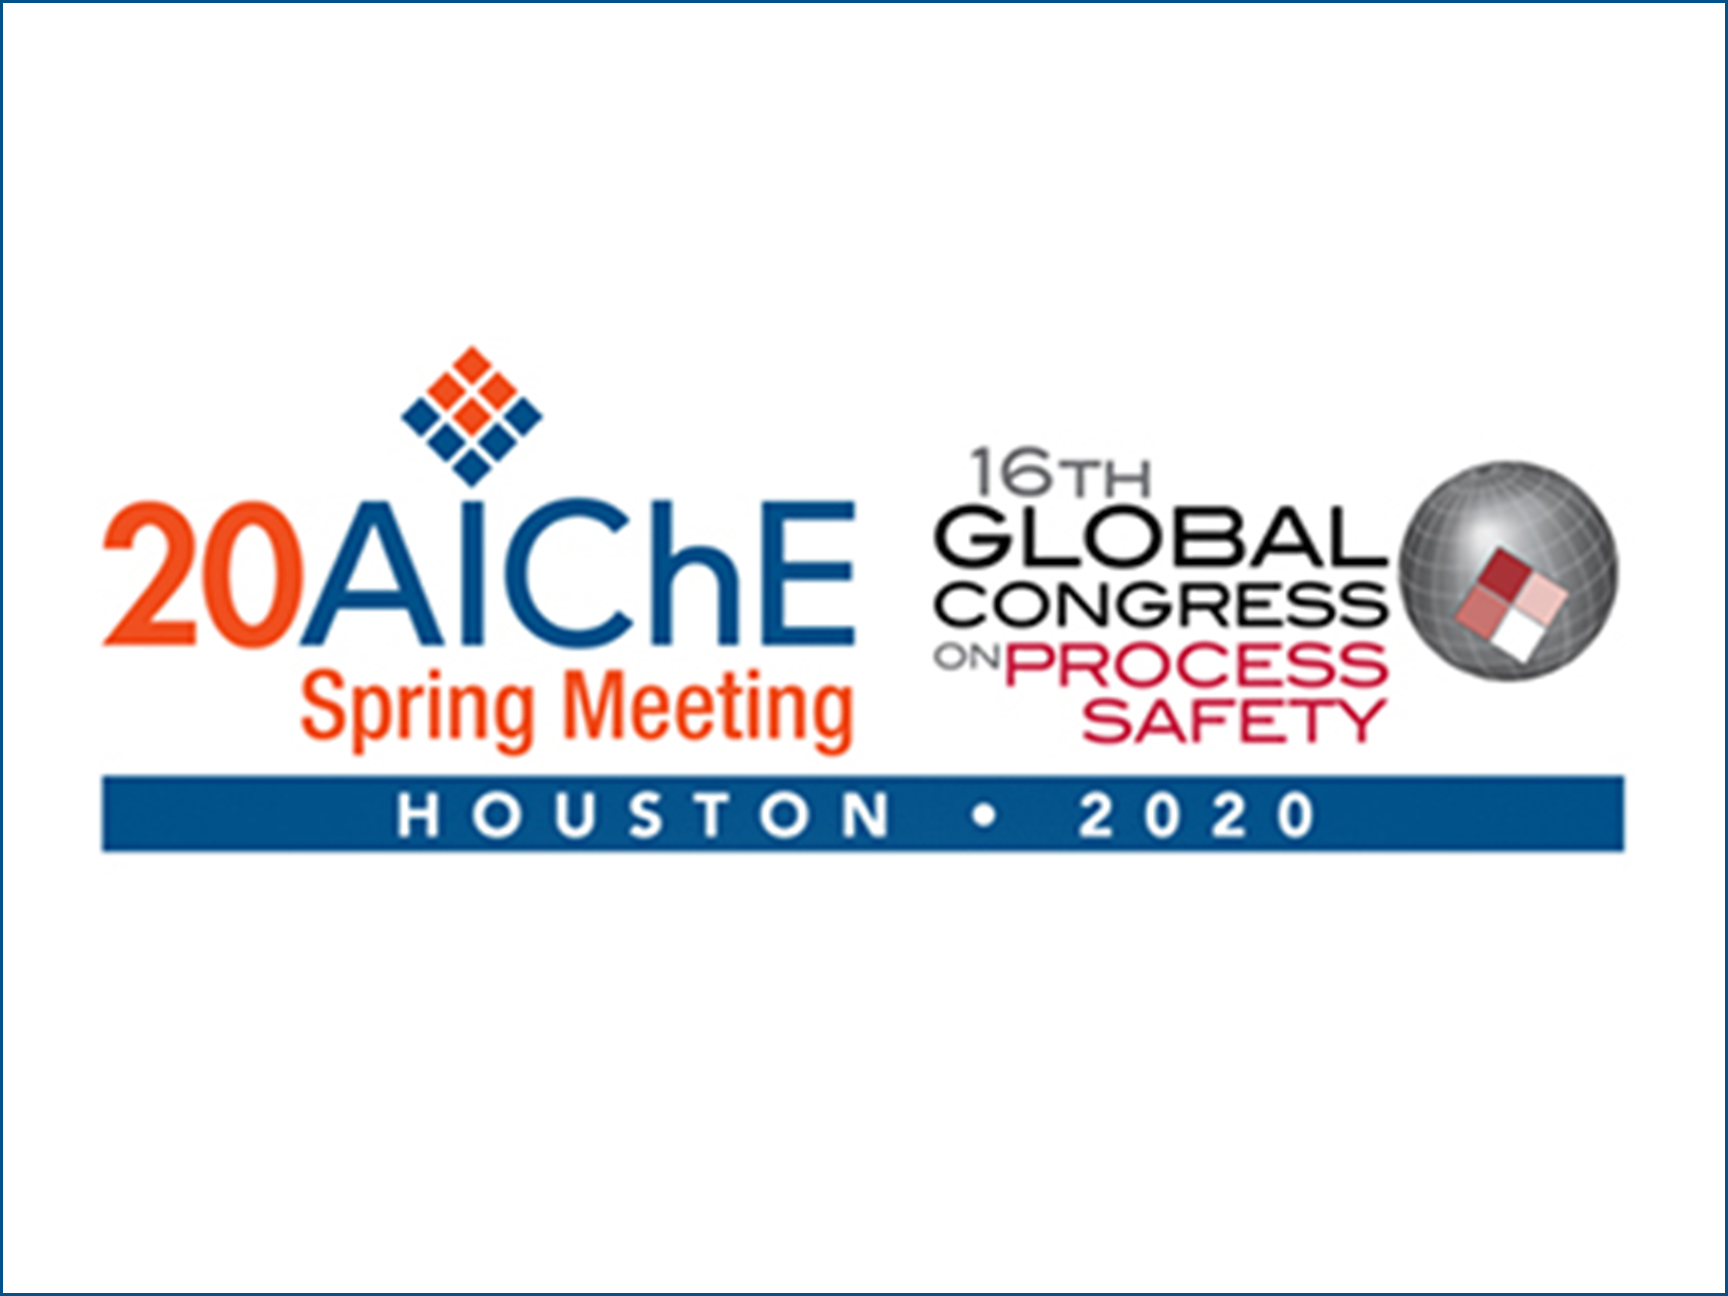 2020 TIEEP Sessions at AIChE Meeting Image